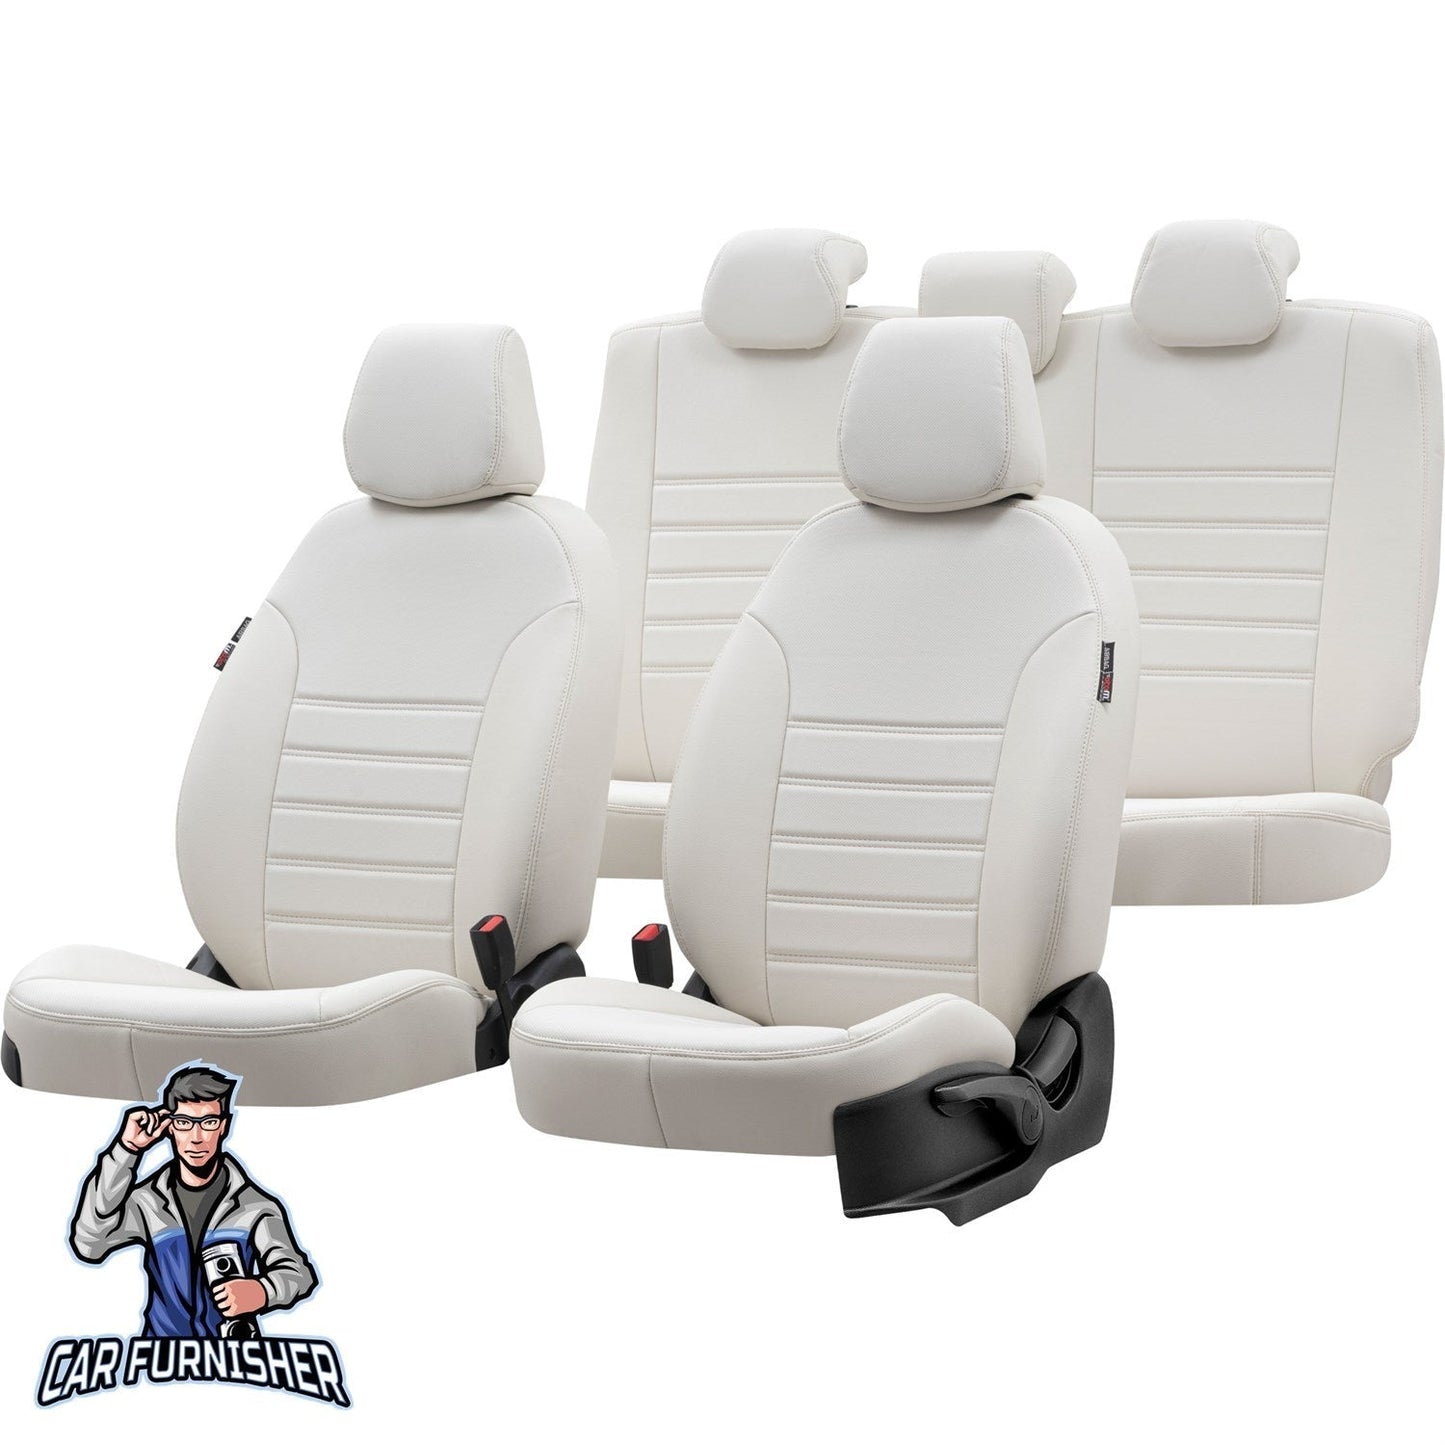 Nissan Interstar Seat Cover Istanbul Leather Design Ivory Leather